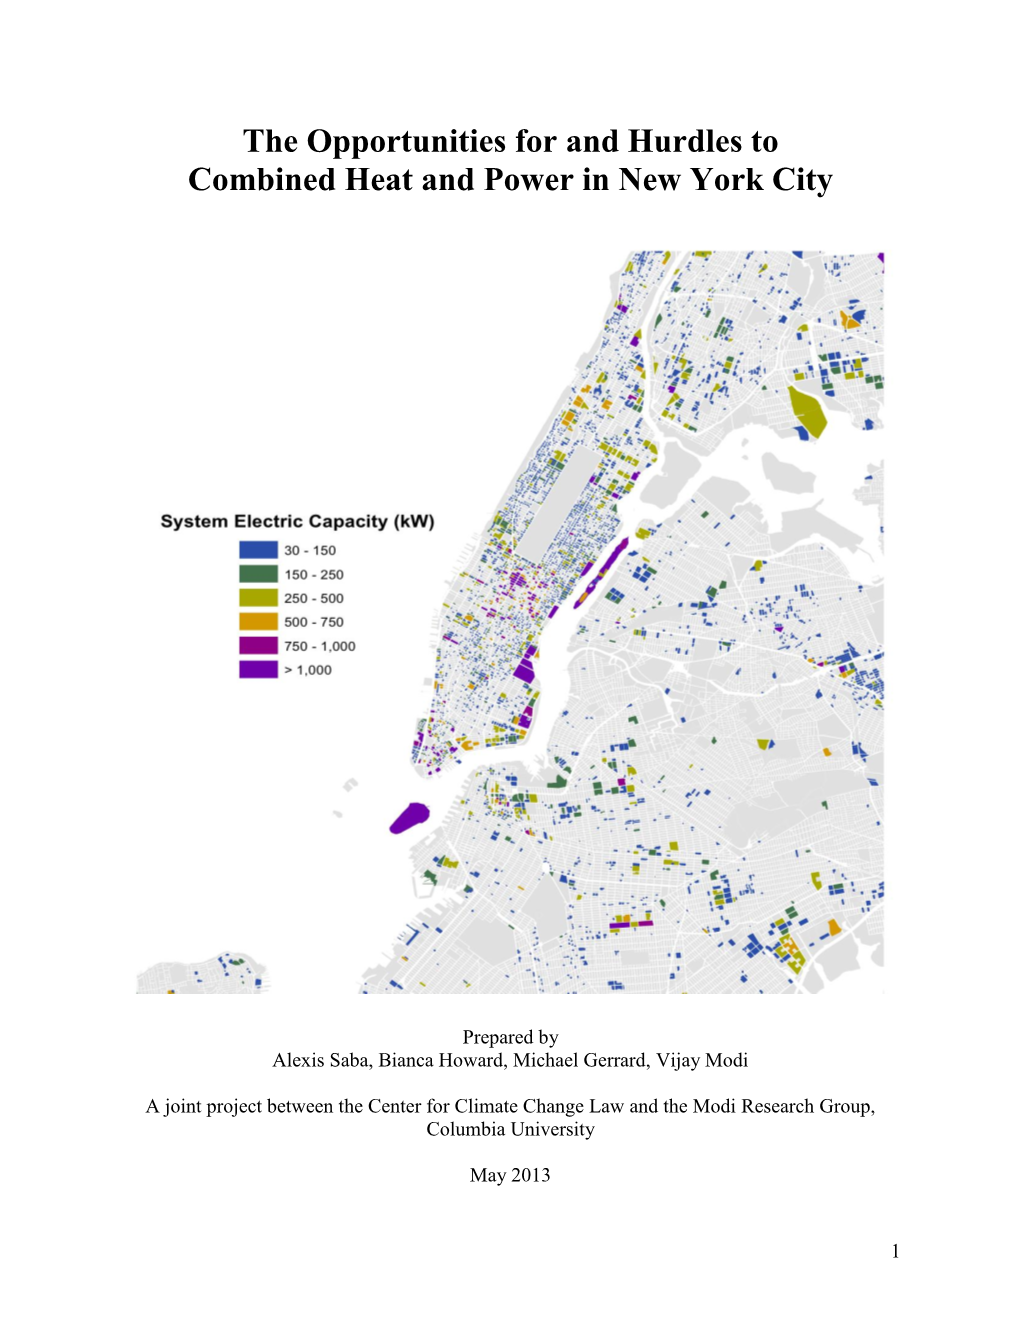 The Opportunities for and Hurdles to Combined Heat and Power in New York City